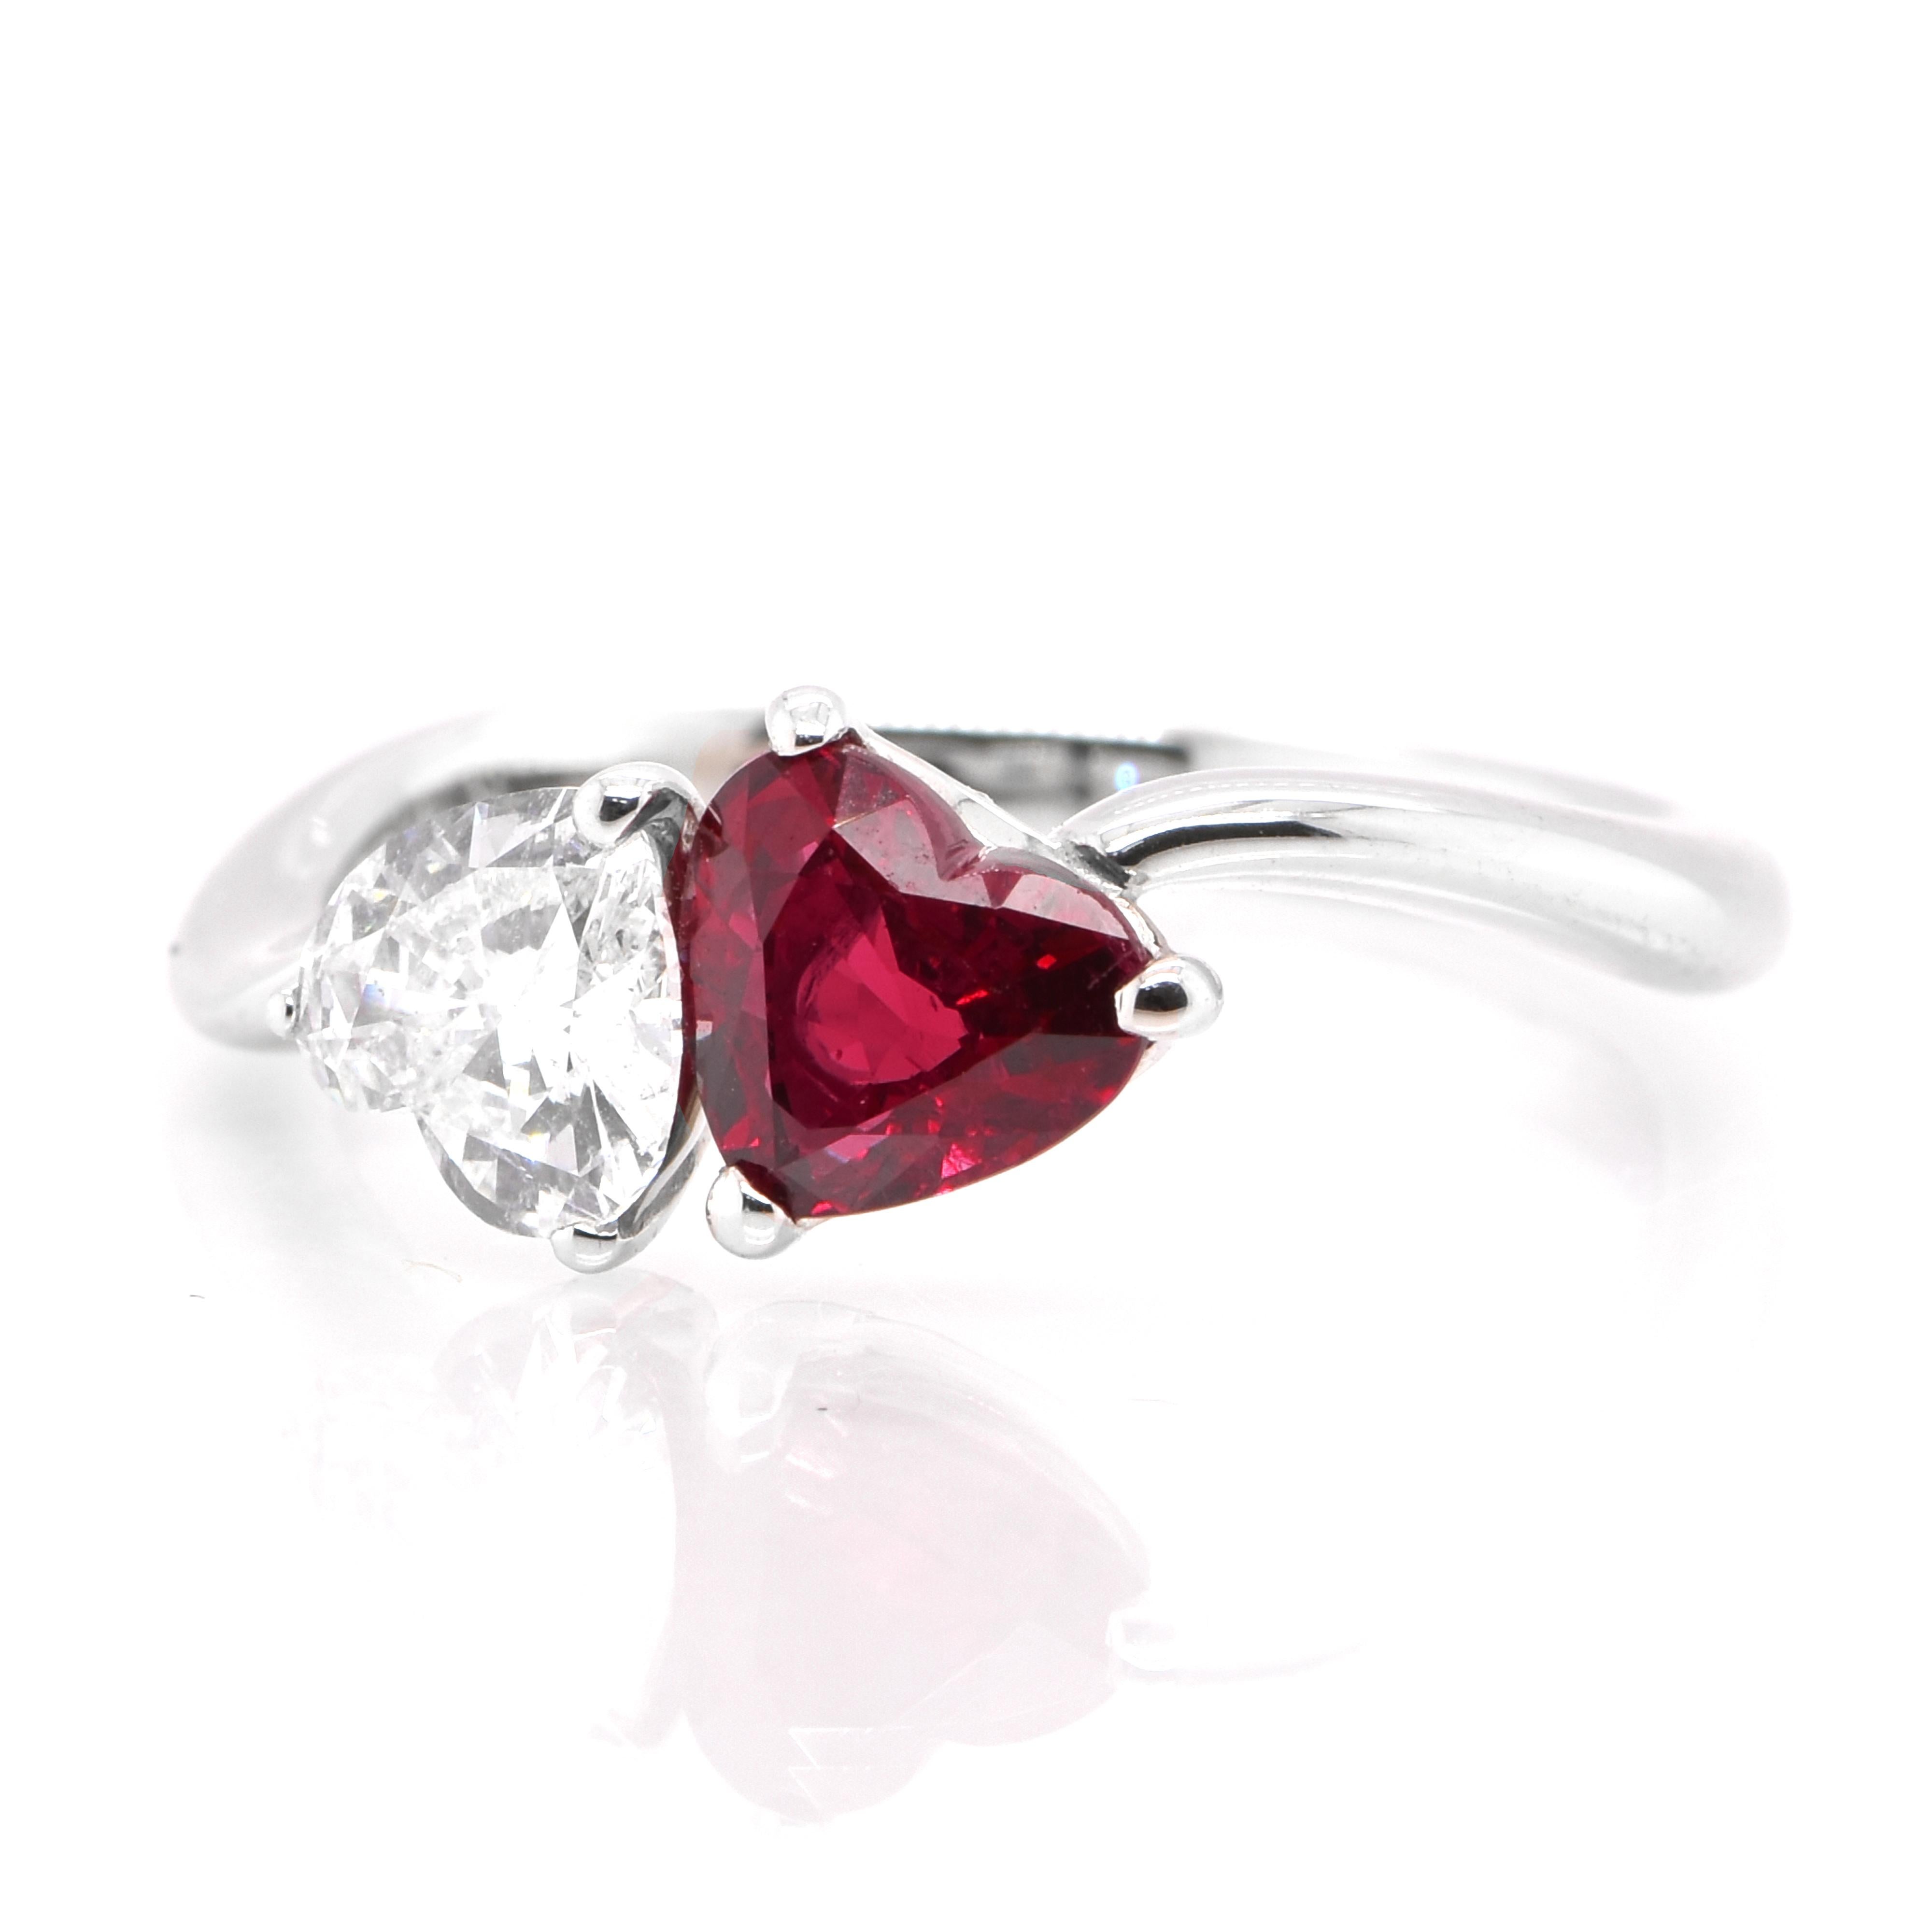 A beautiful Engagement ring set in Platinum featuring a 1.05 Carat Natural Ruby and 0.55 Carat Diamond. Rubies are referred to as 